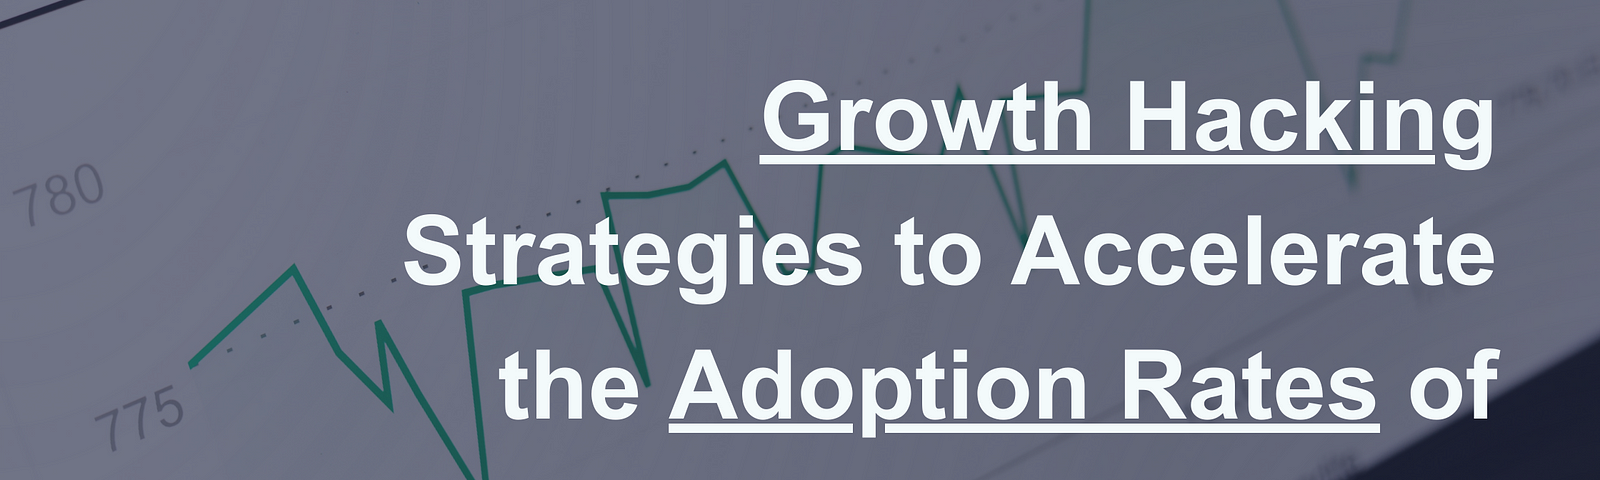 Growth Hacking Strategies to Accelerate the Adoption Rates of Web3 Products